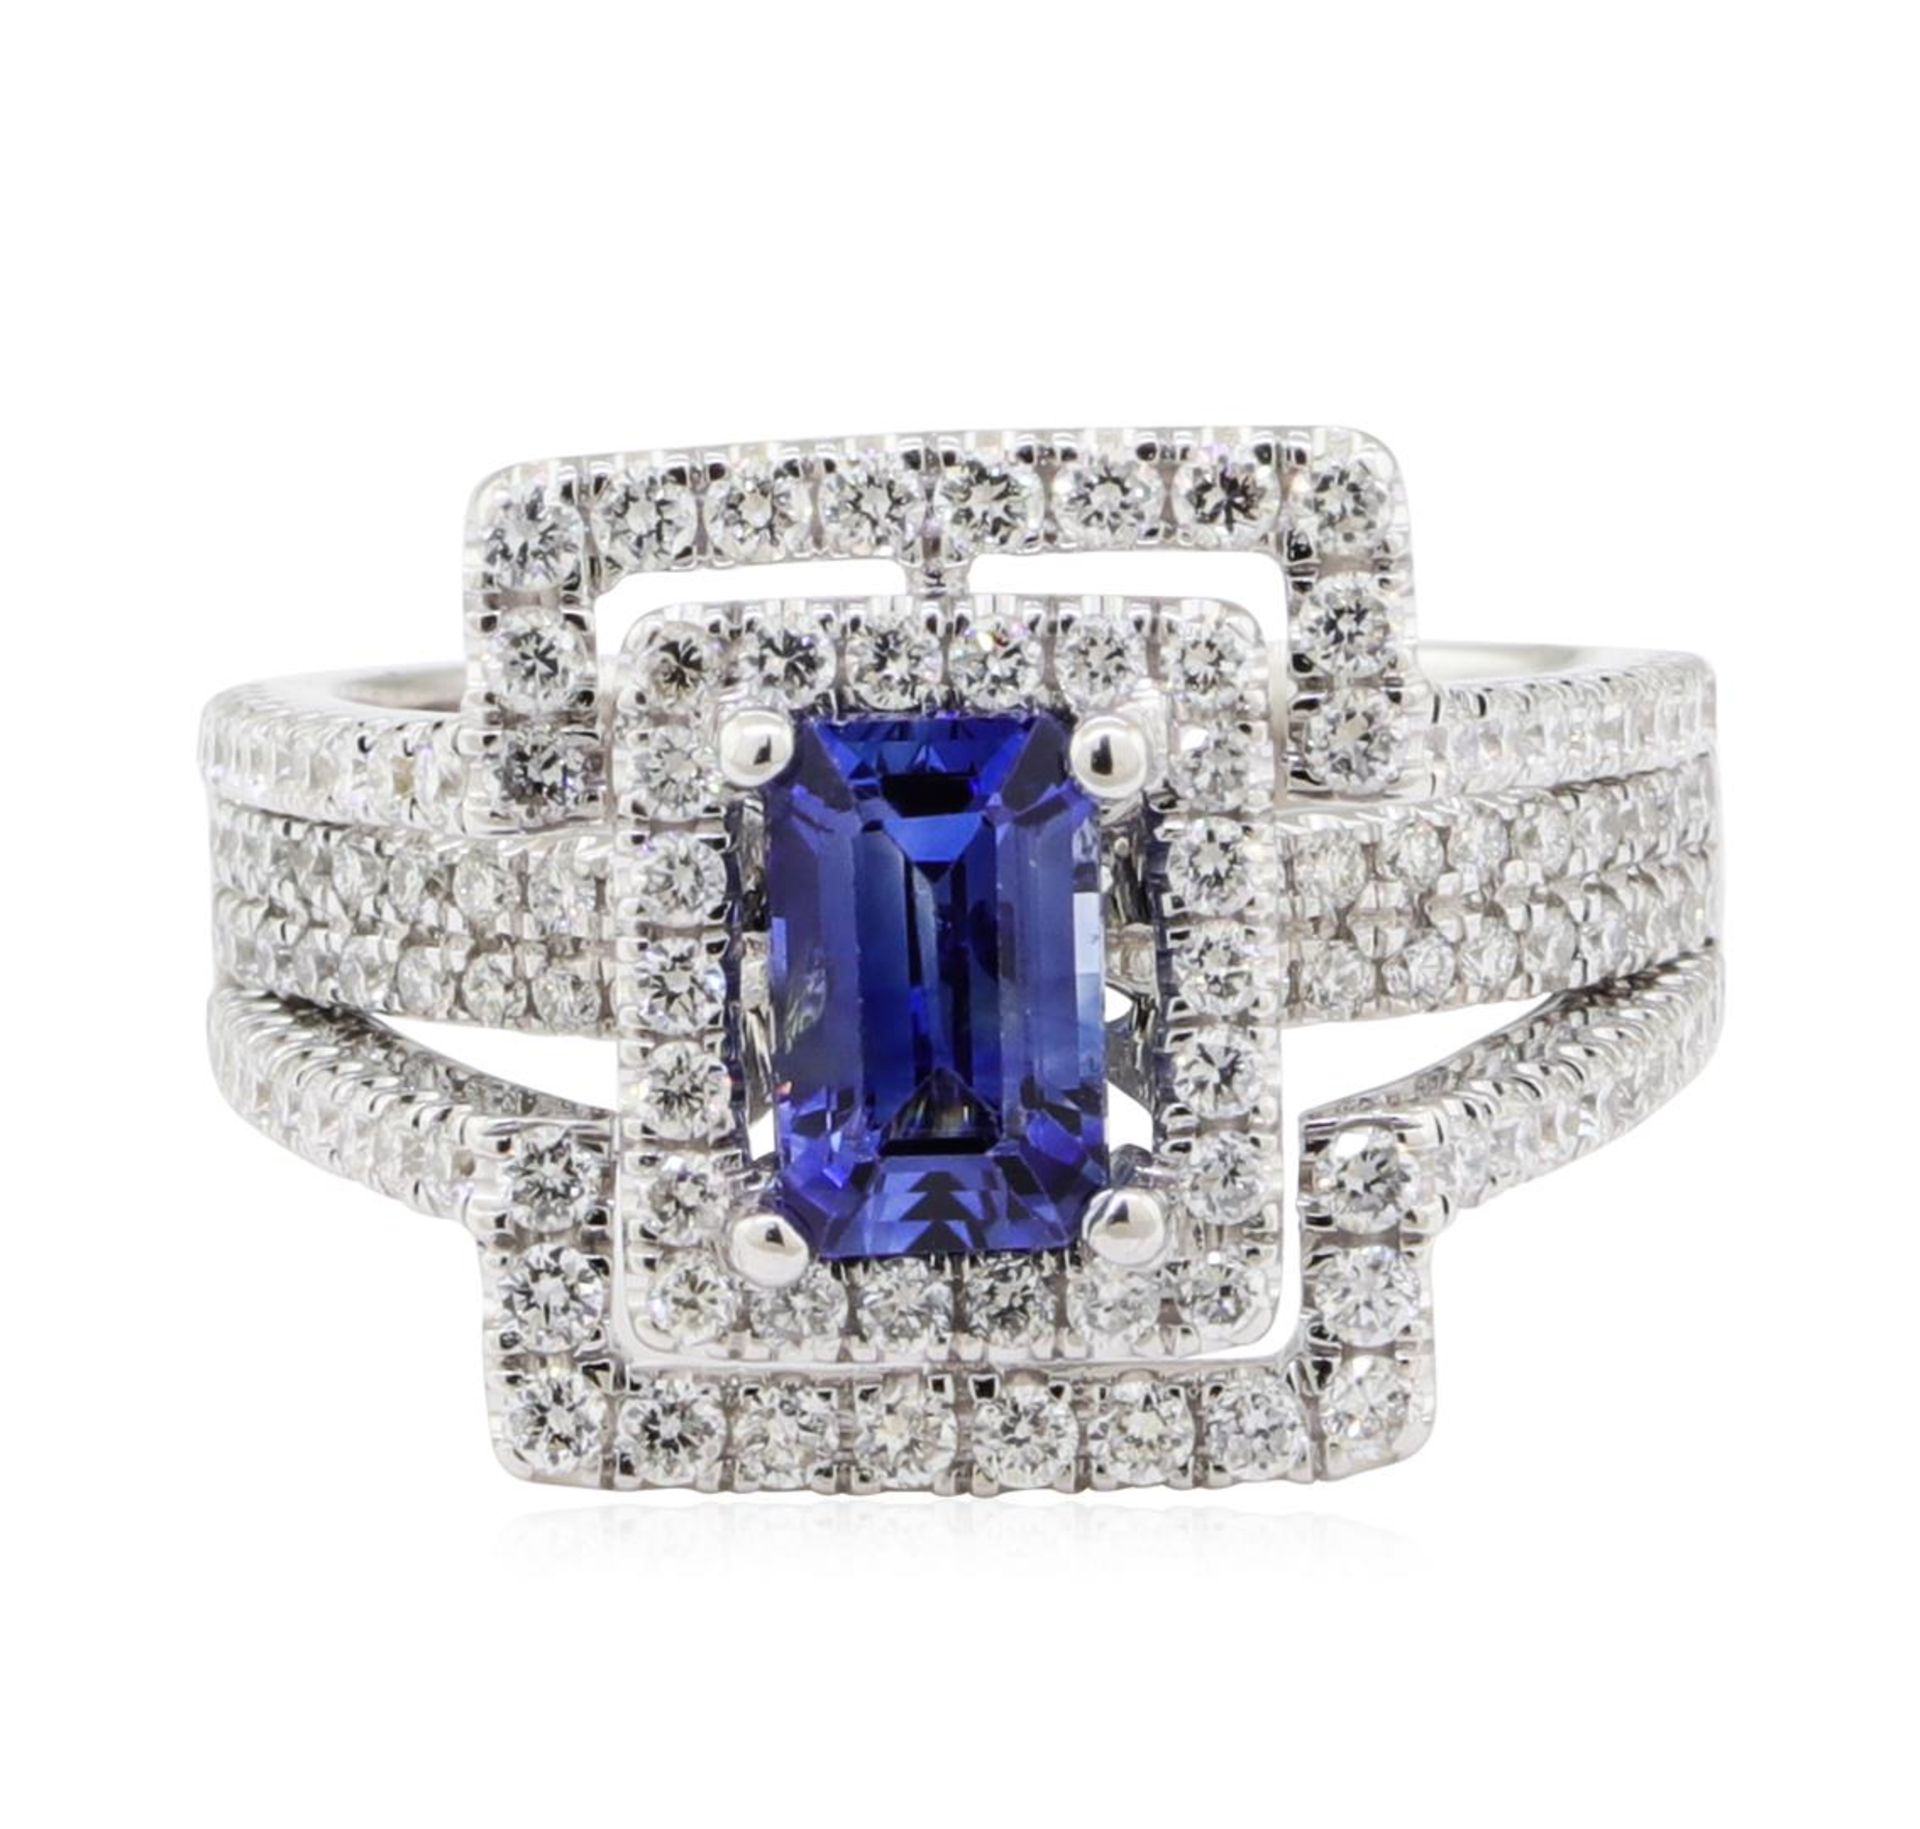 2.40 ctw Sapphire and Diamond Ring - 14KT White Gold - Image 2 of 5